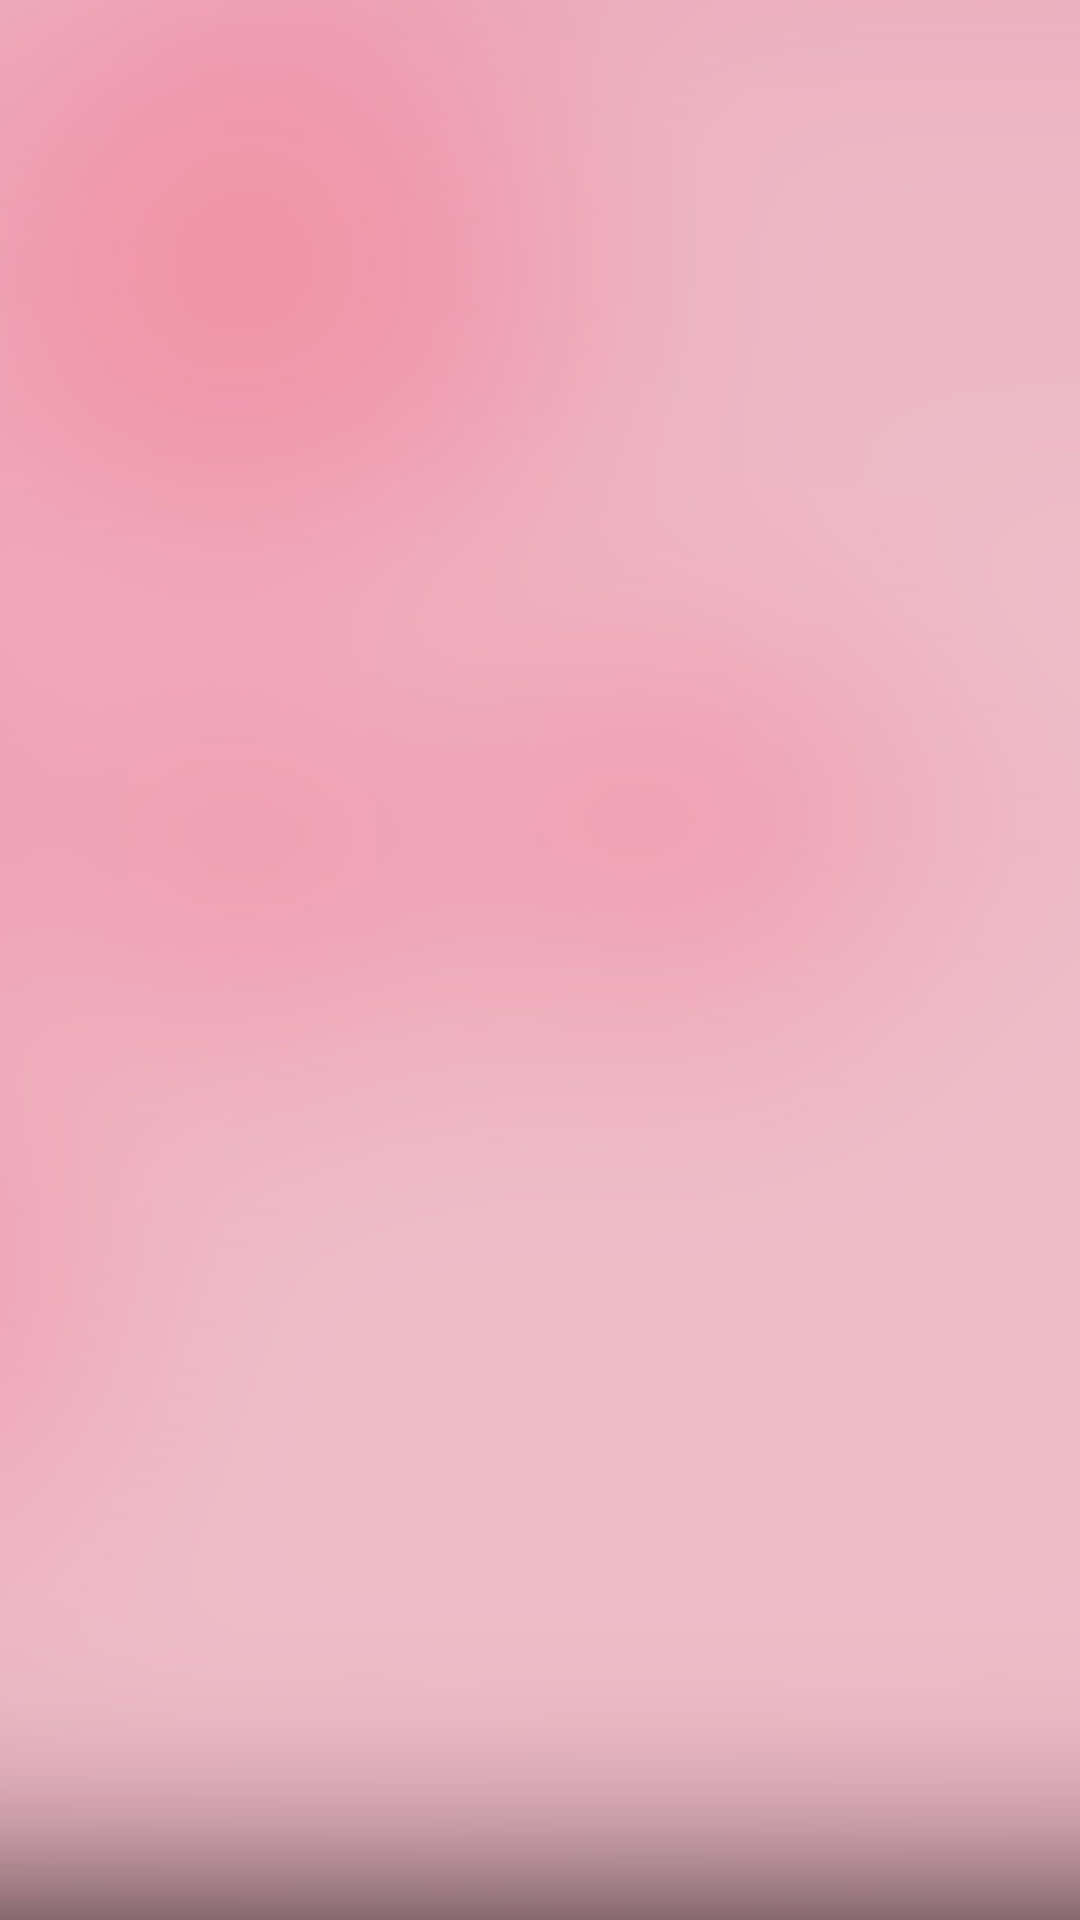 A Light and Airy Pink Background